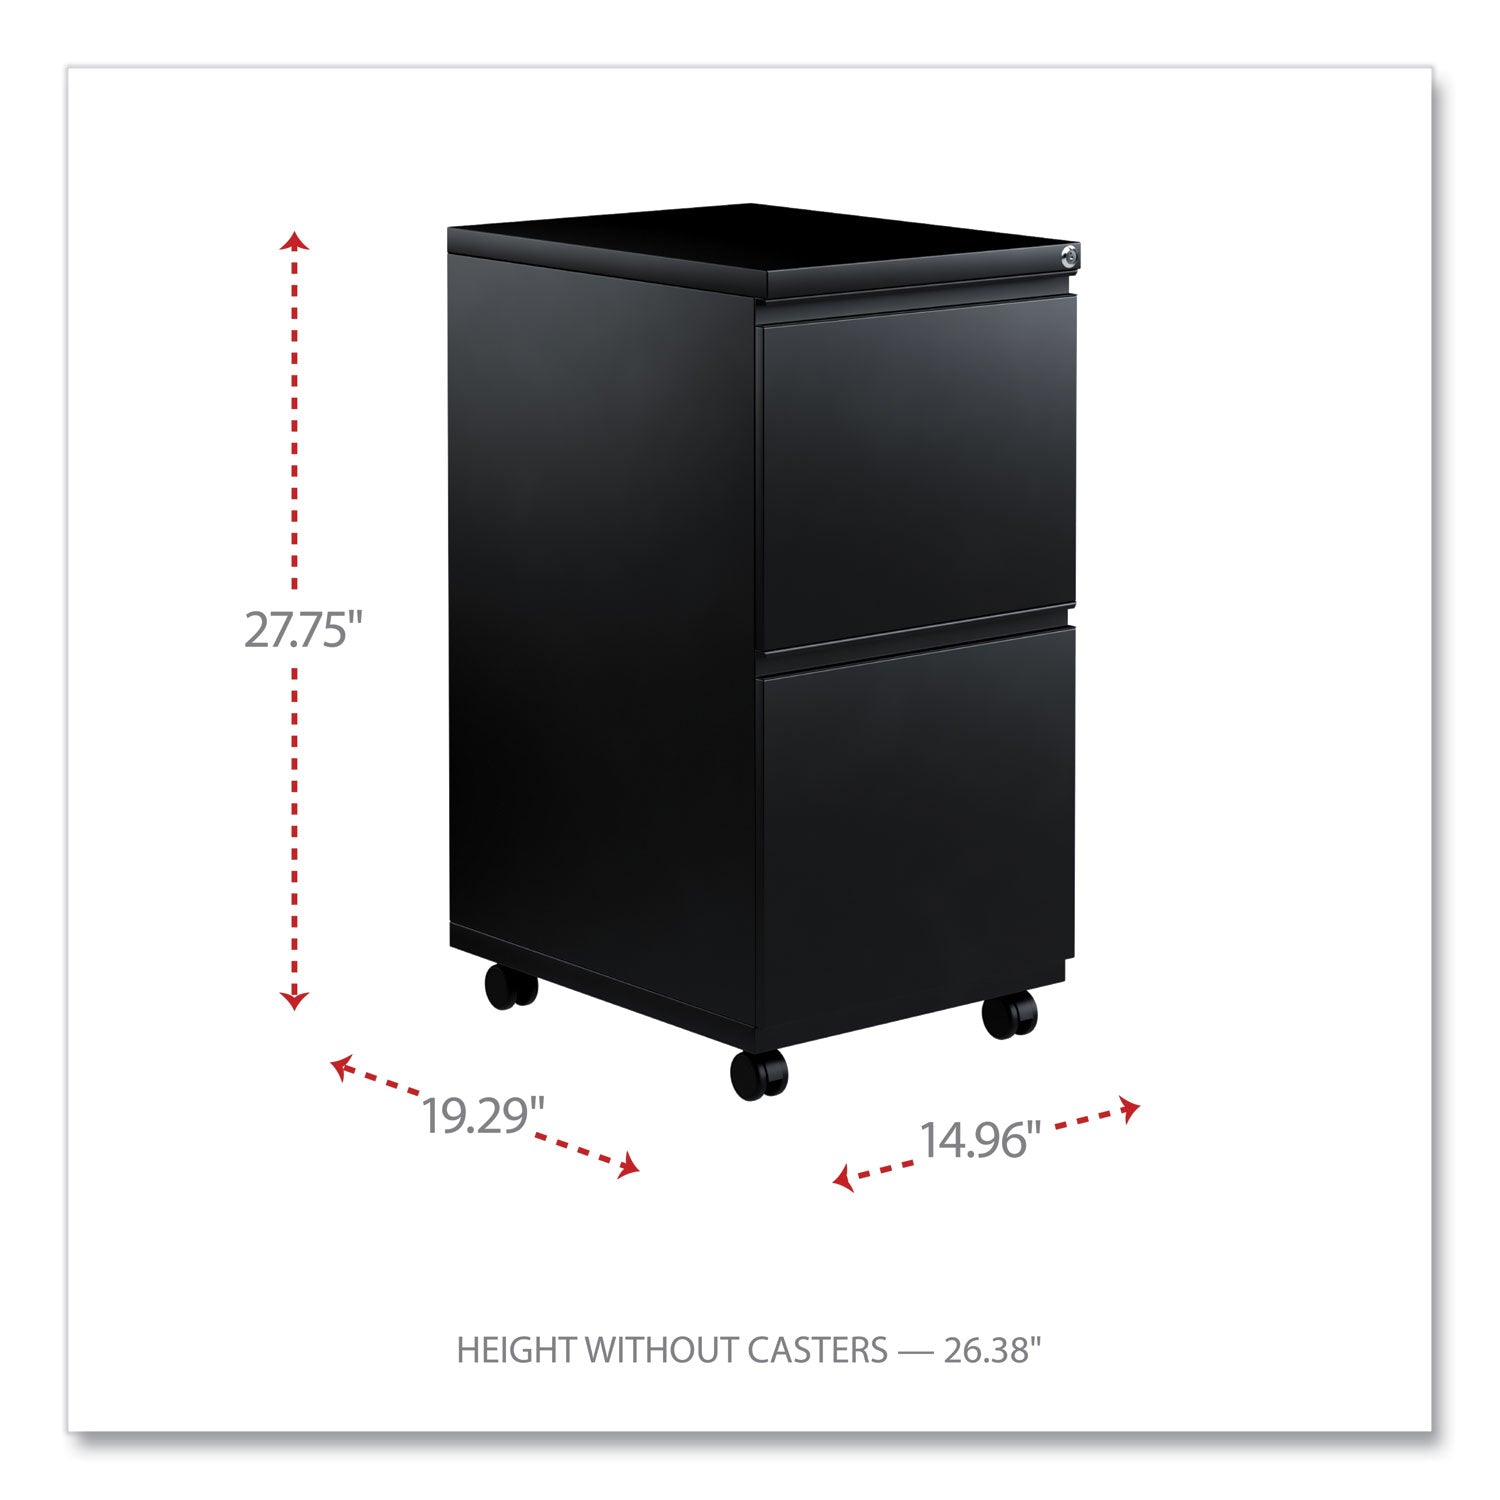 file-pedestal-with-full-length-pull-left-or-right-2-legal-letter-size-file-drawers-black-1496-x-1929-x-2775_alepbffbl - 2